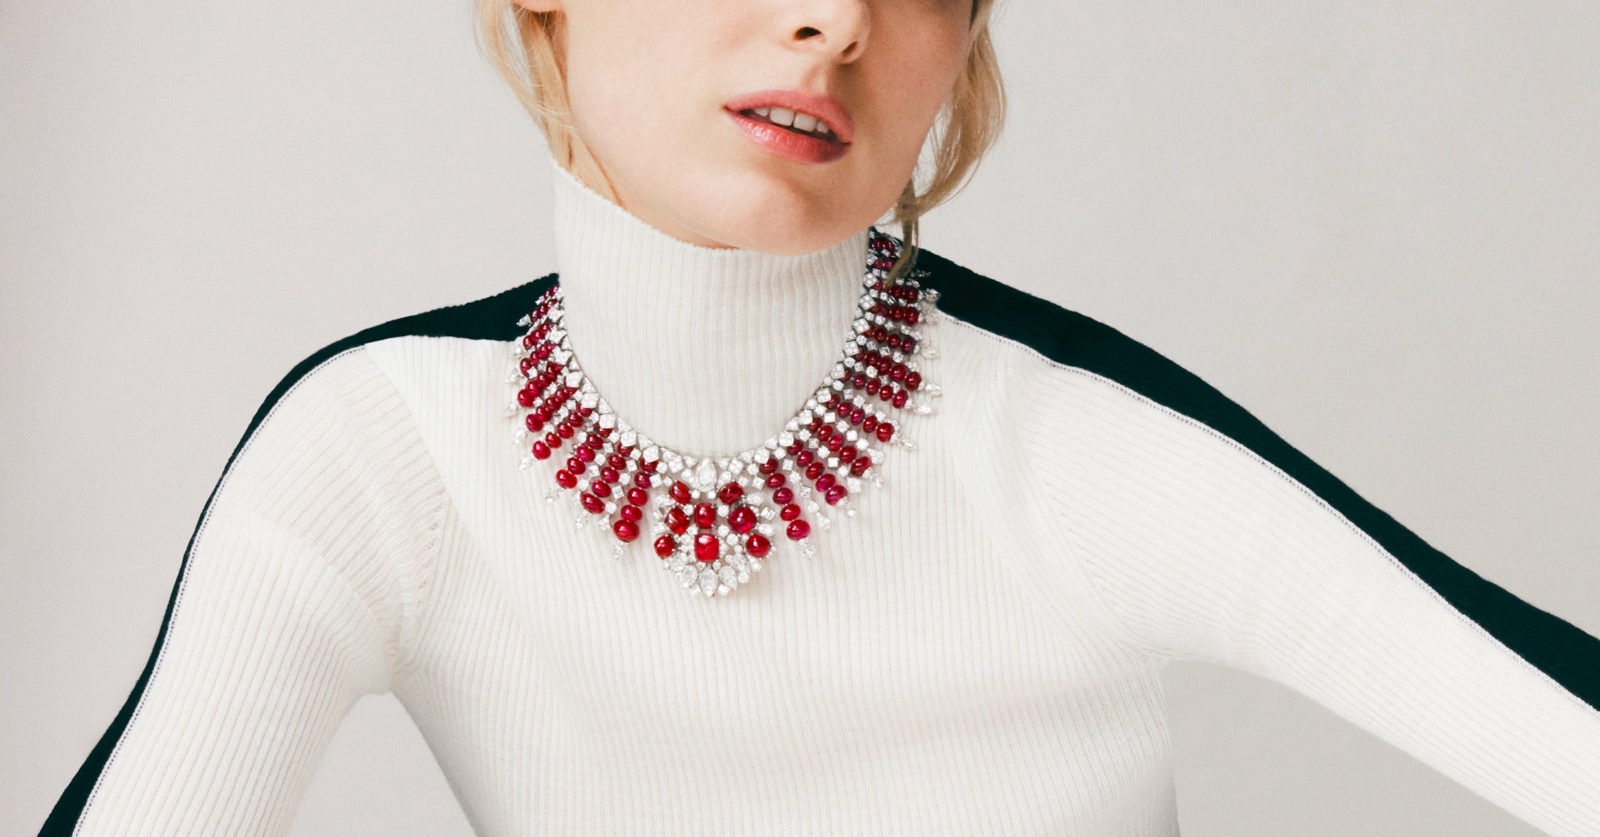 The most resplendent ruby jewellery designs to flaunt this July